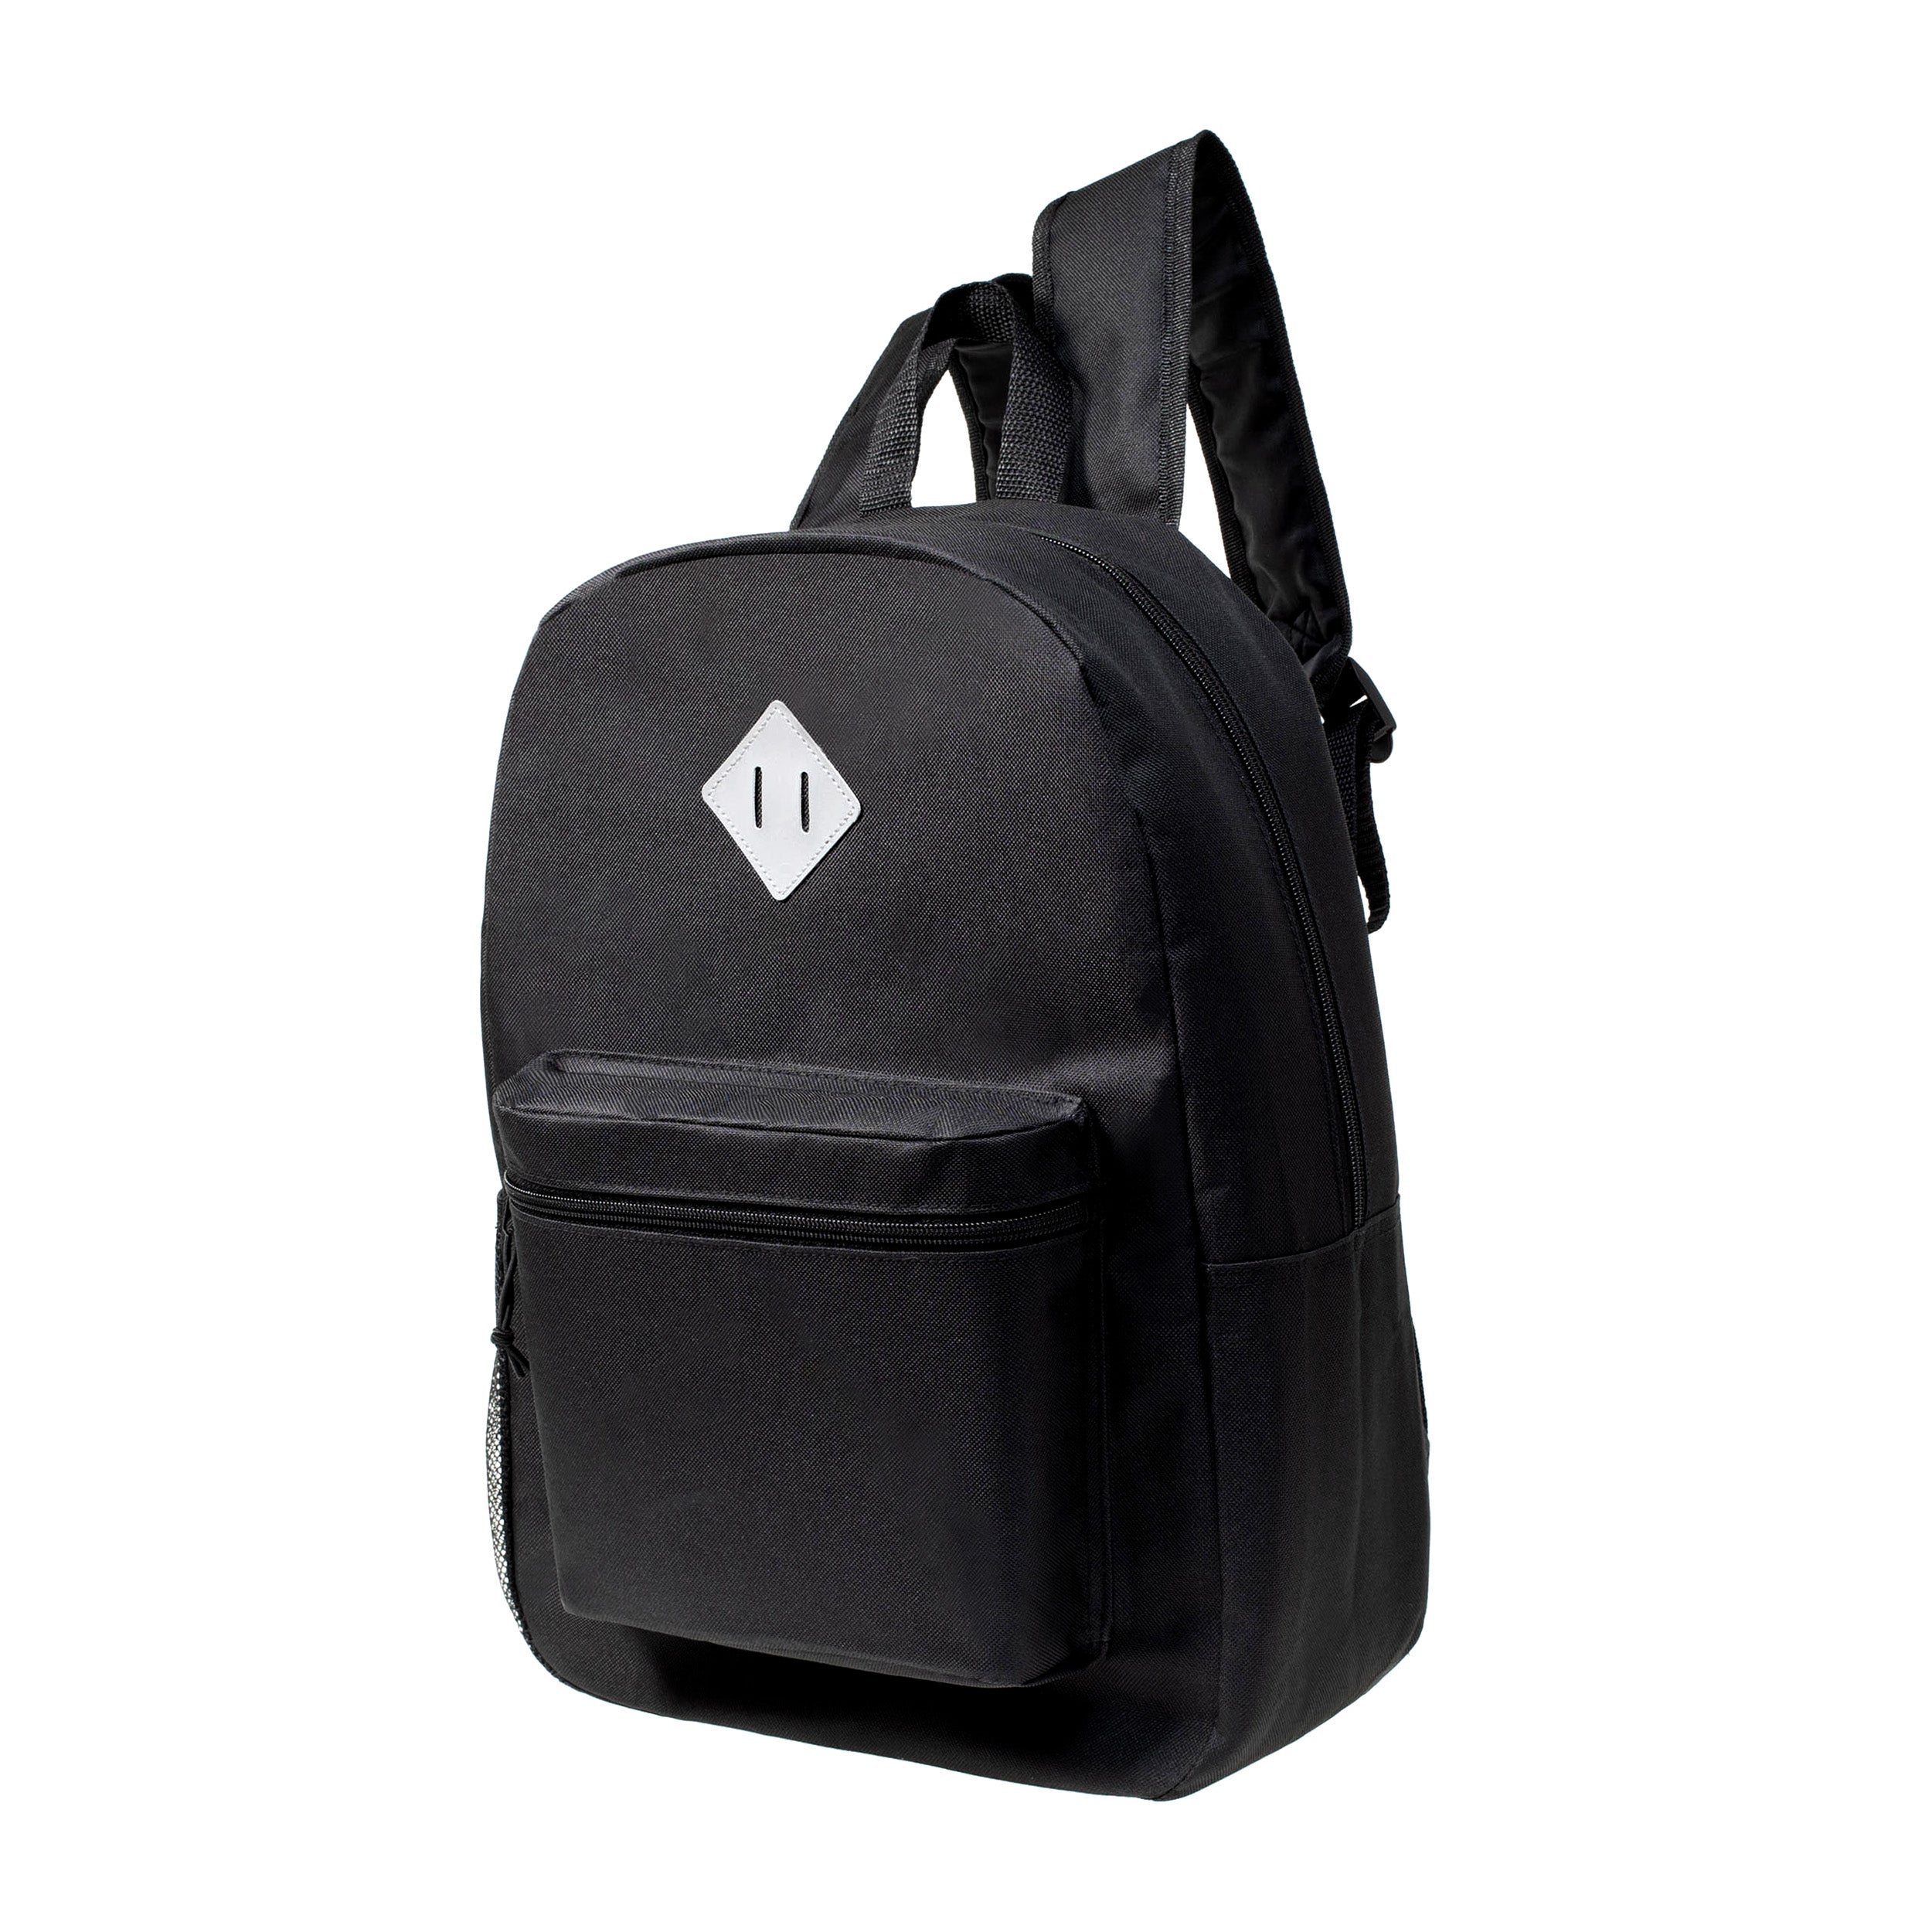 17" Wholesale Backpack in Black with Designer Inspired Patch - Bulk Case of 24